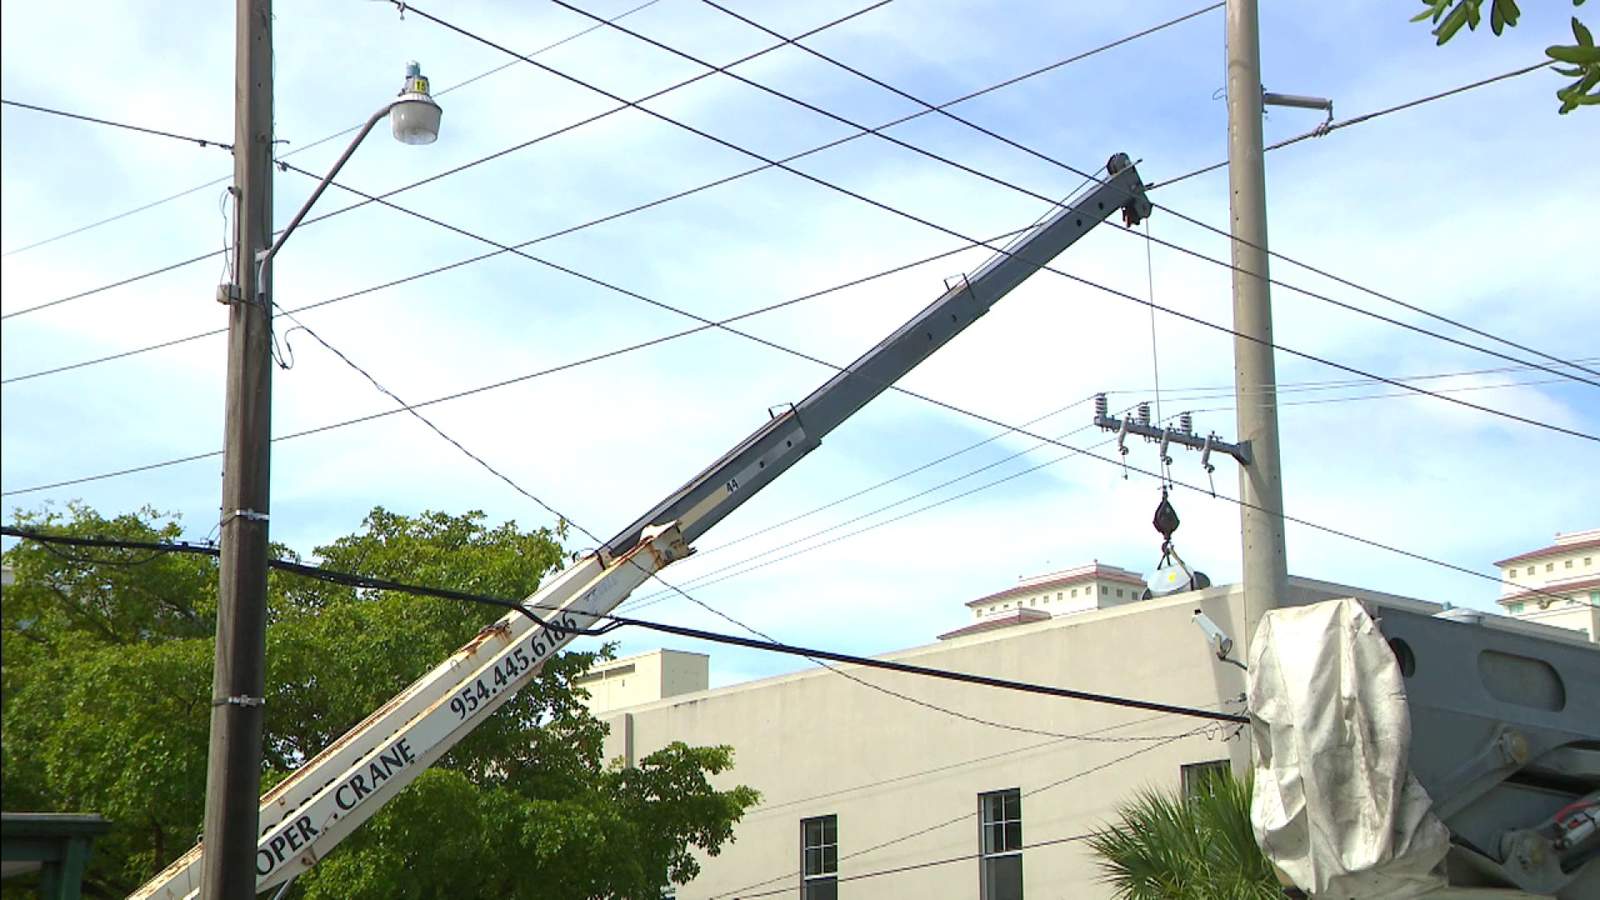 Crane hits power line in Fort Lauderdale, causing explosion and injuring 1